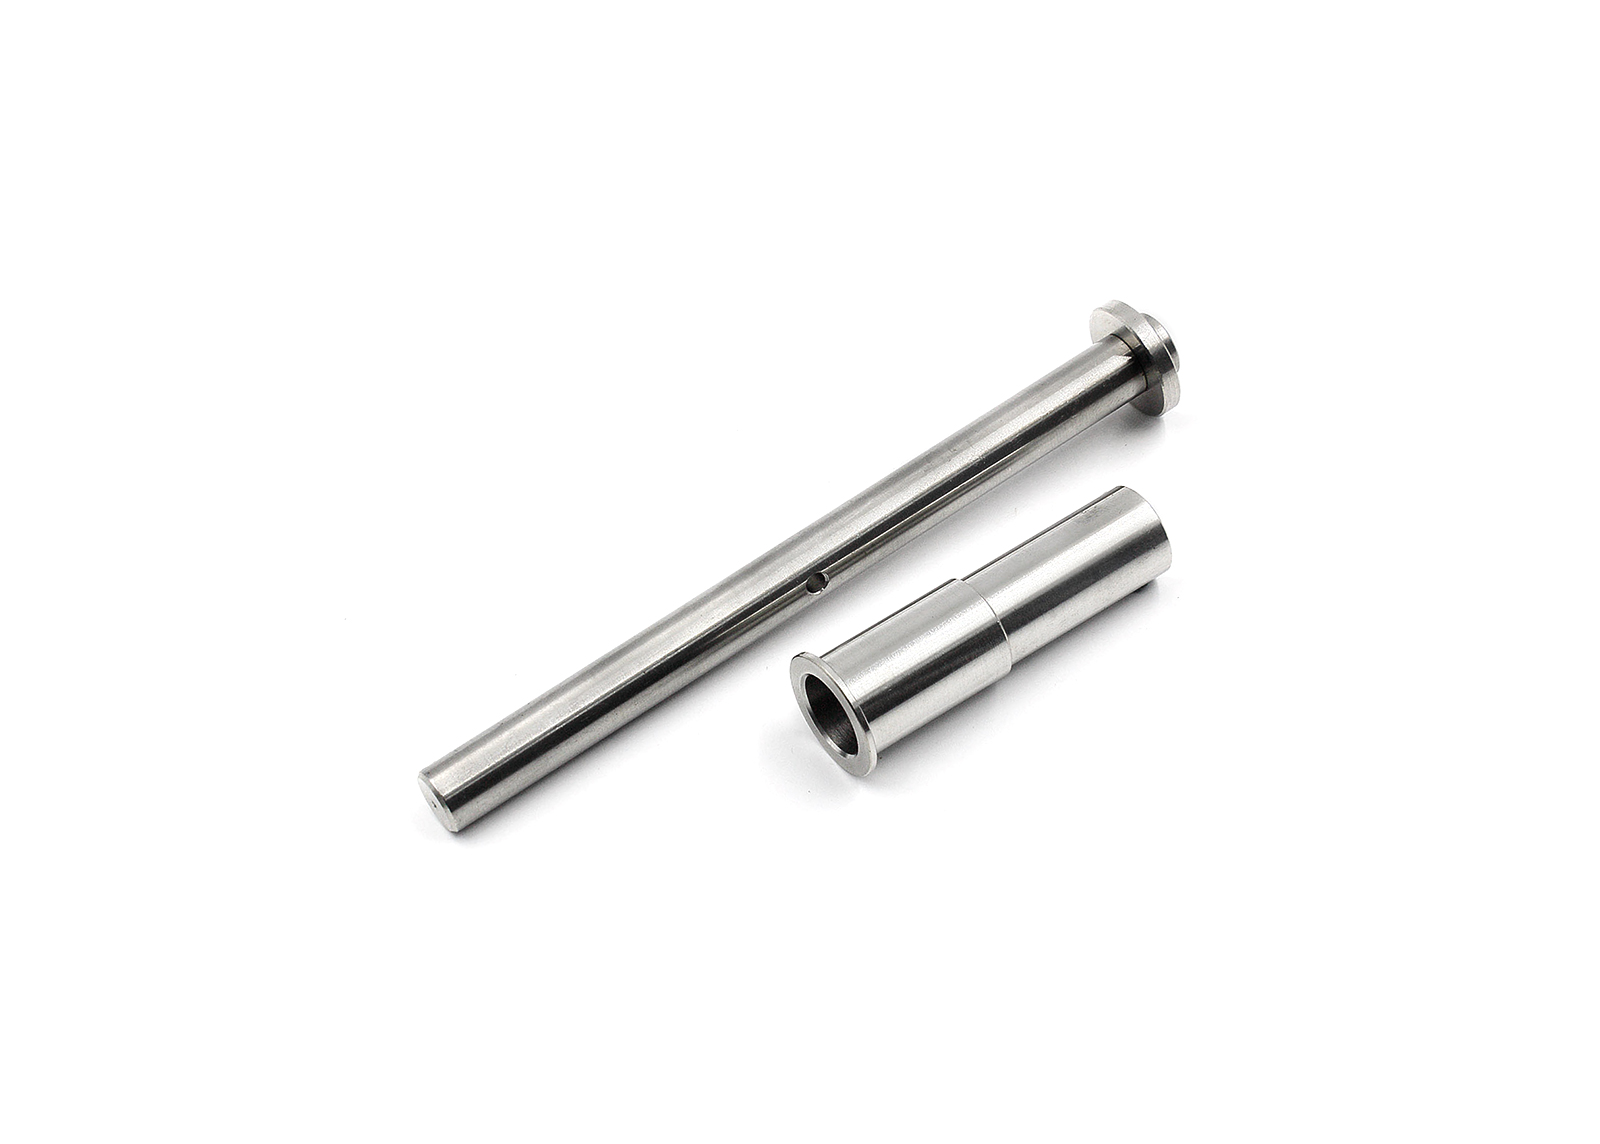 Stainless Recoil Spring Guide for WA .45 Series(Bushing Type) - Modify Airsoft